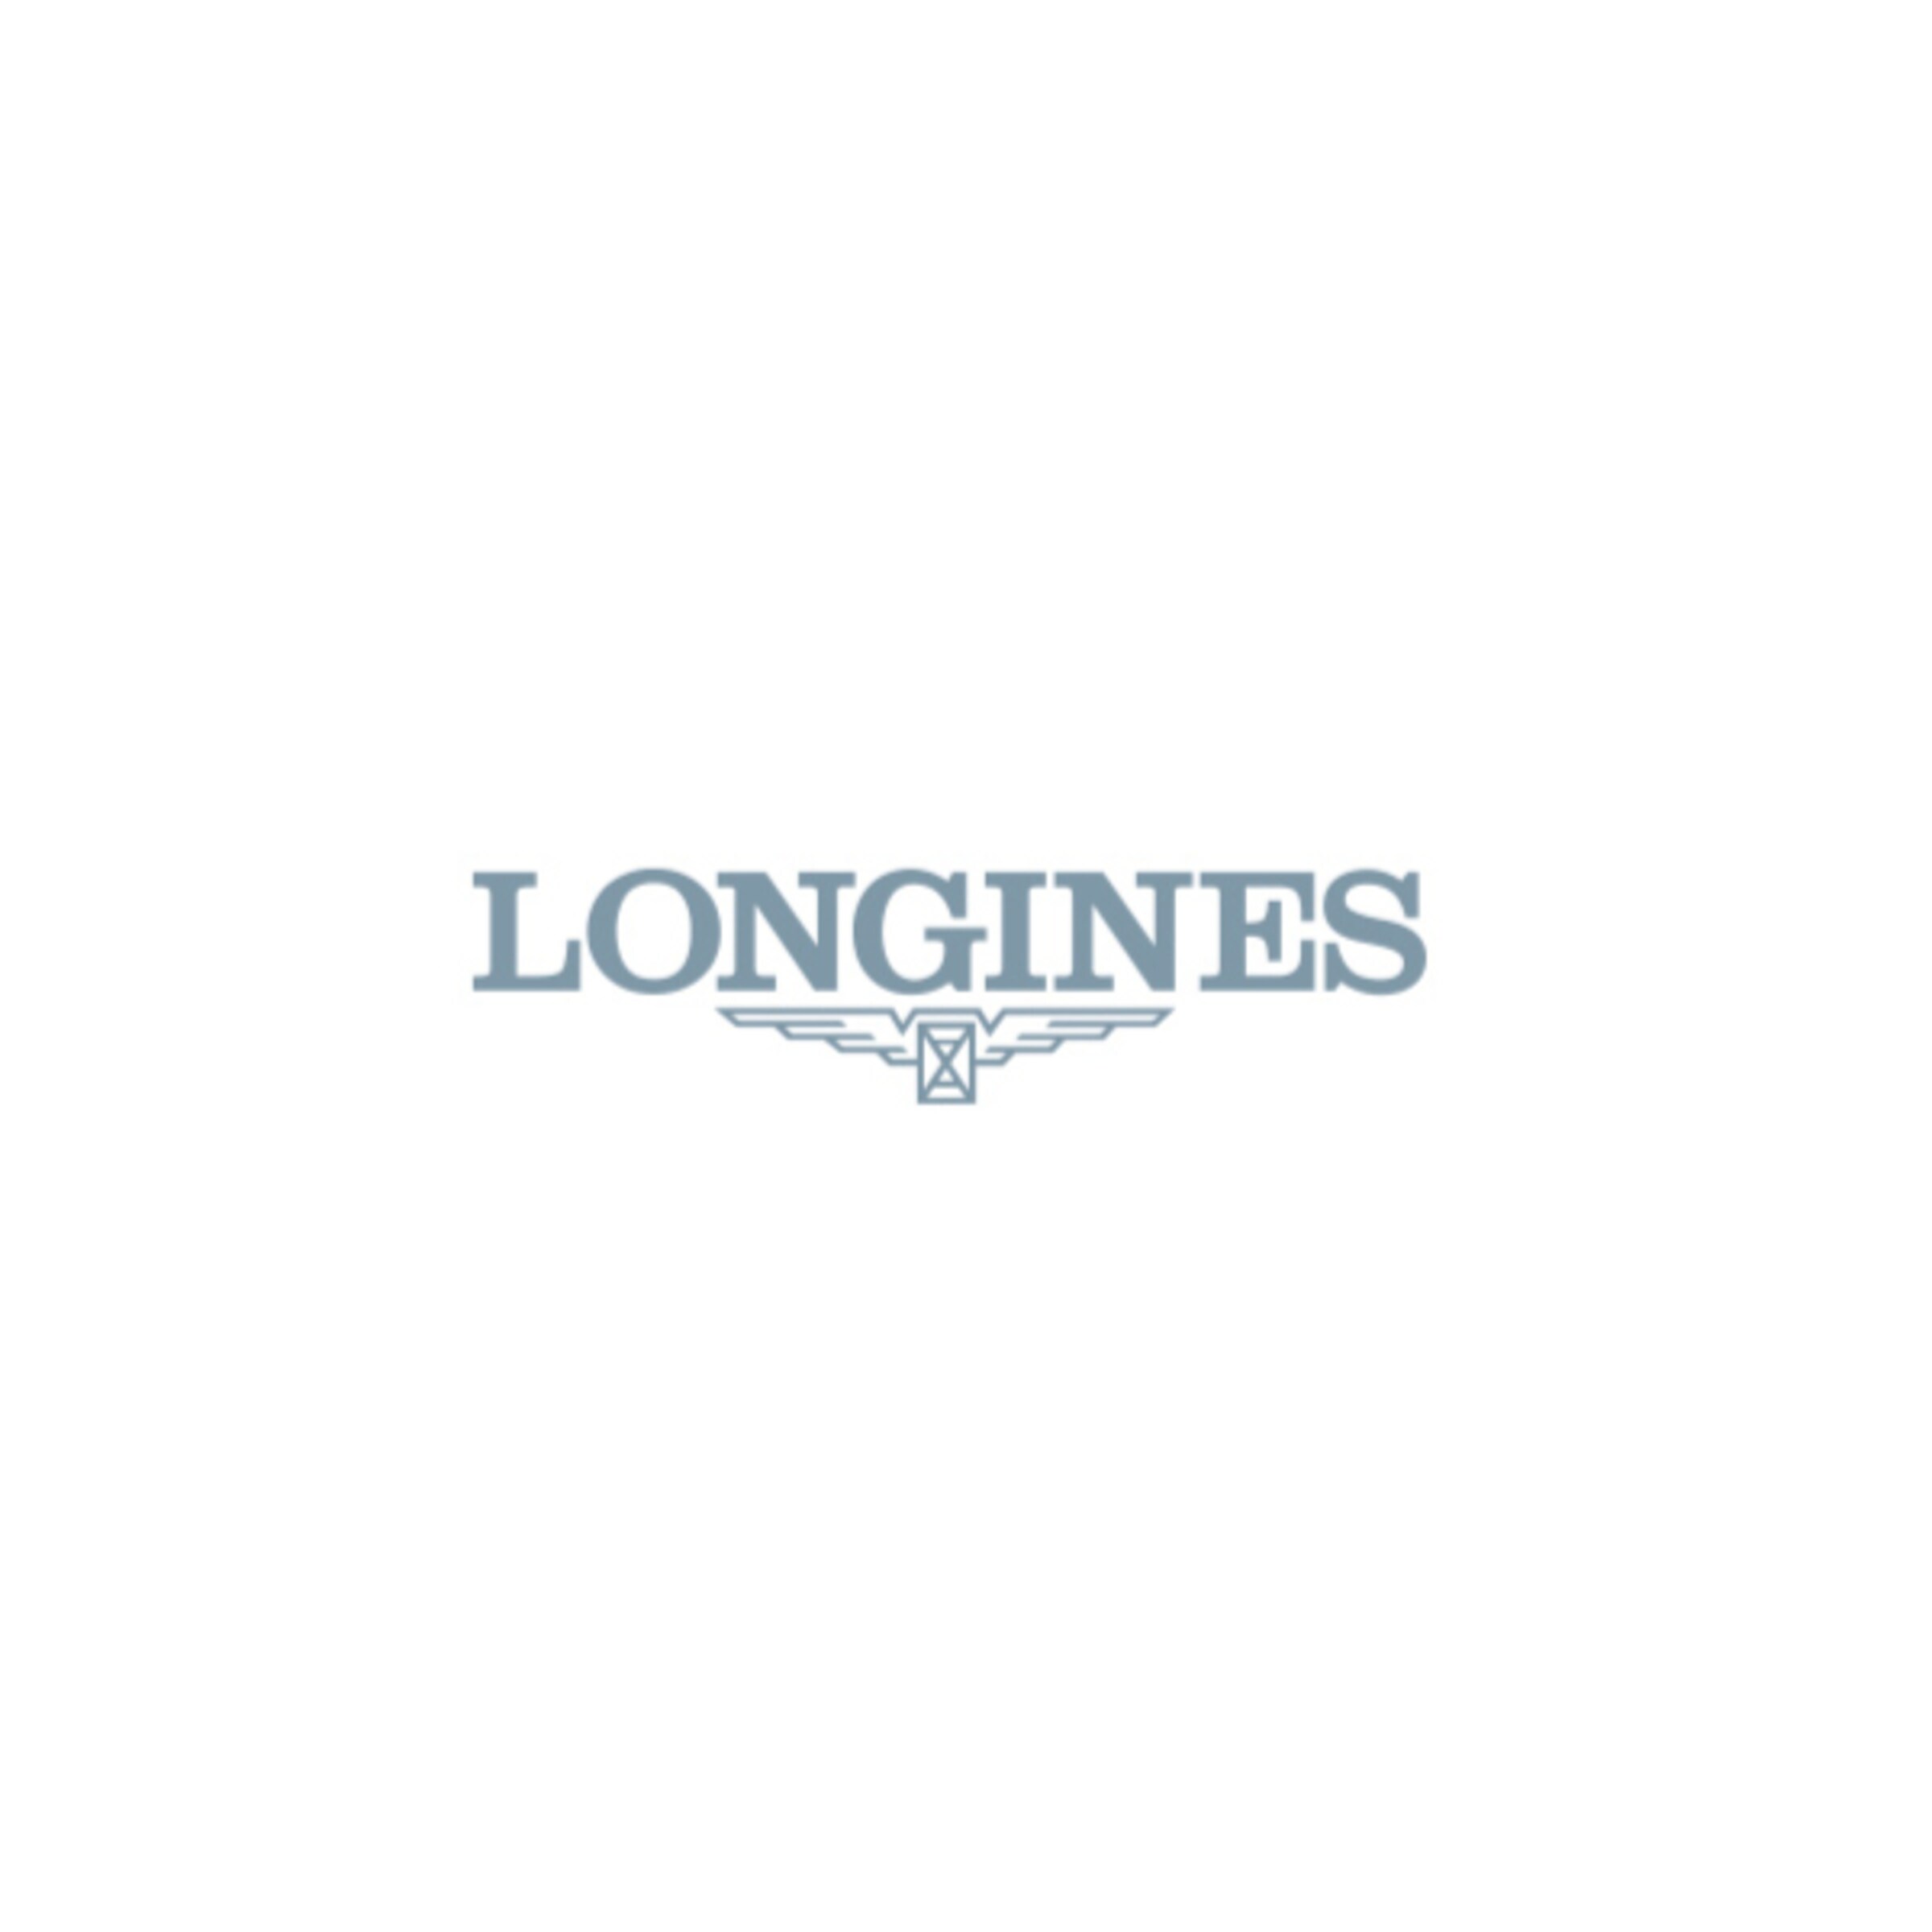 Longines HYDROCONQUEST Quartz Stainless steel and yellow PVD coating Watch - L3.740.3.56.7